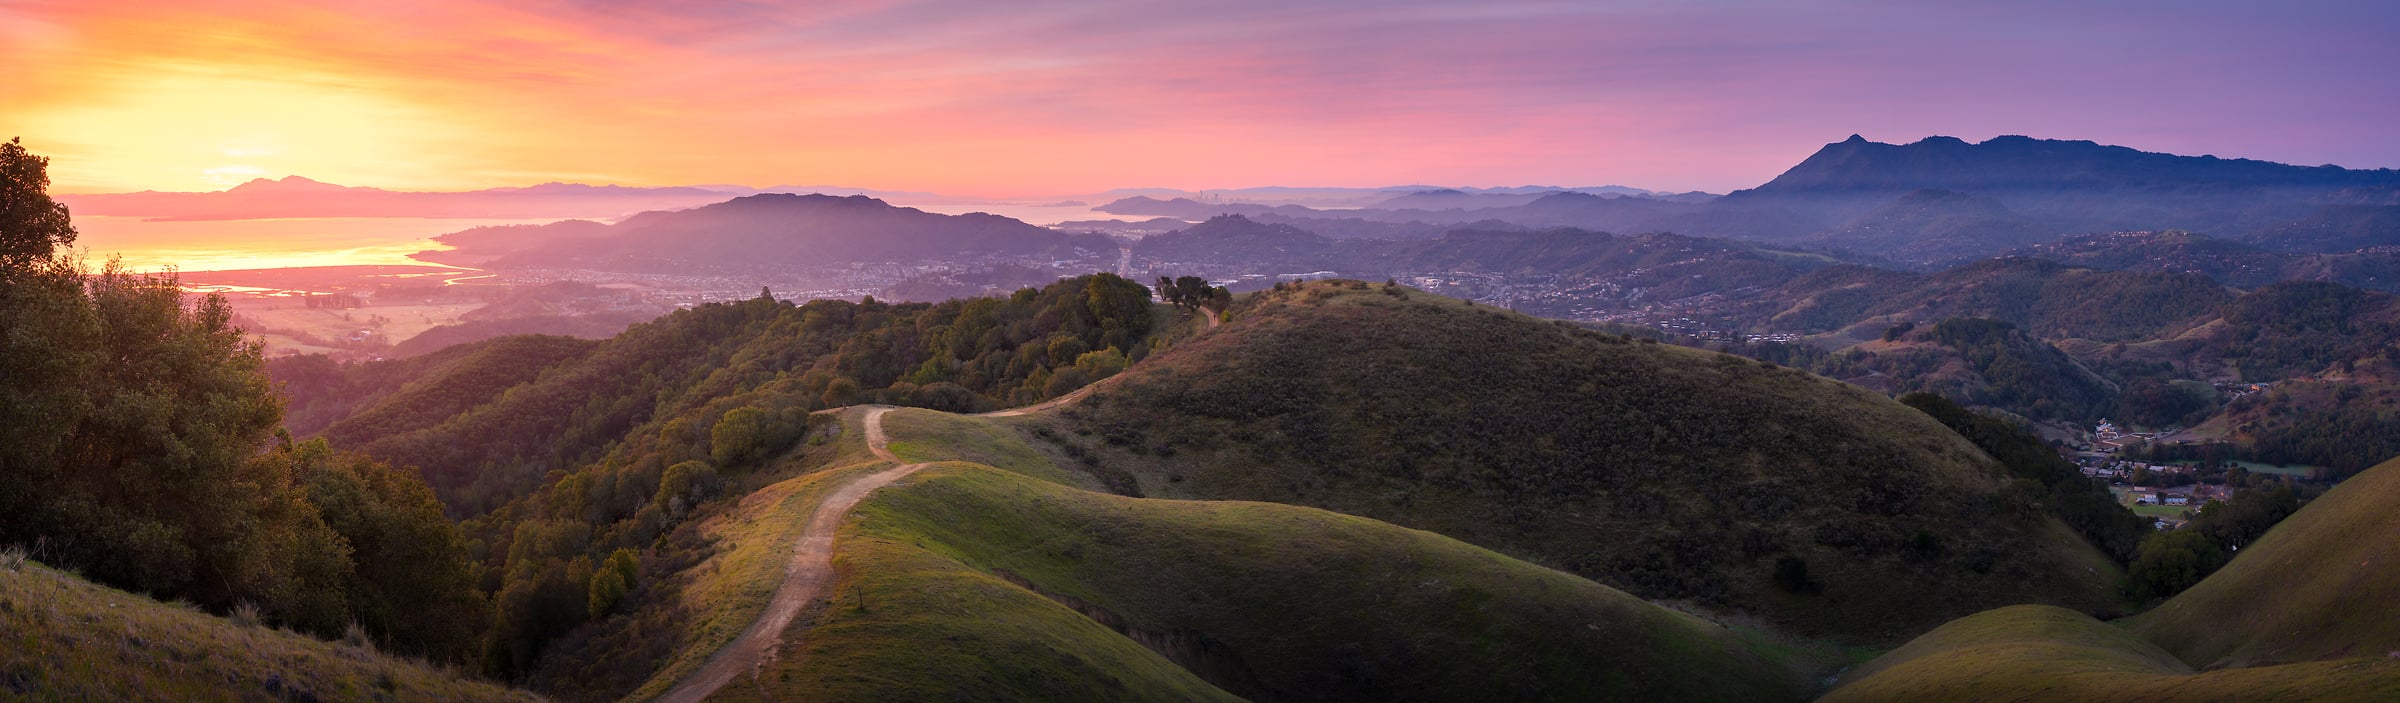 180 megapixels! A very high resolution, large-format VAST photo print of a hiking trail on rolling hills while a beautiful sunrise happens in the sky; landscape panorama photograph created by Jeff Lewis in Marin County, California.